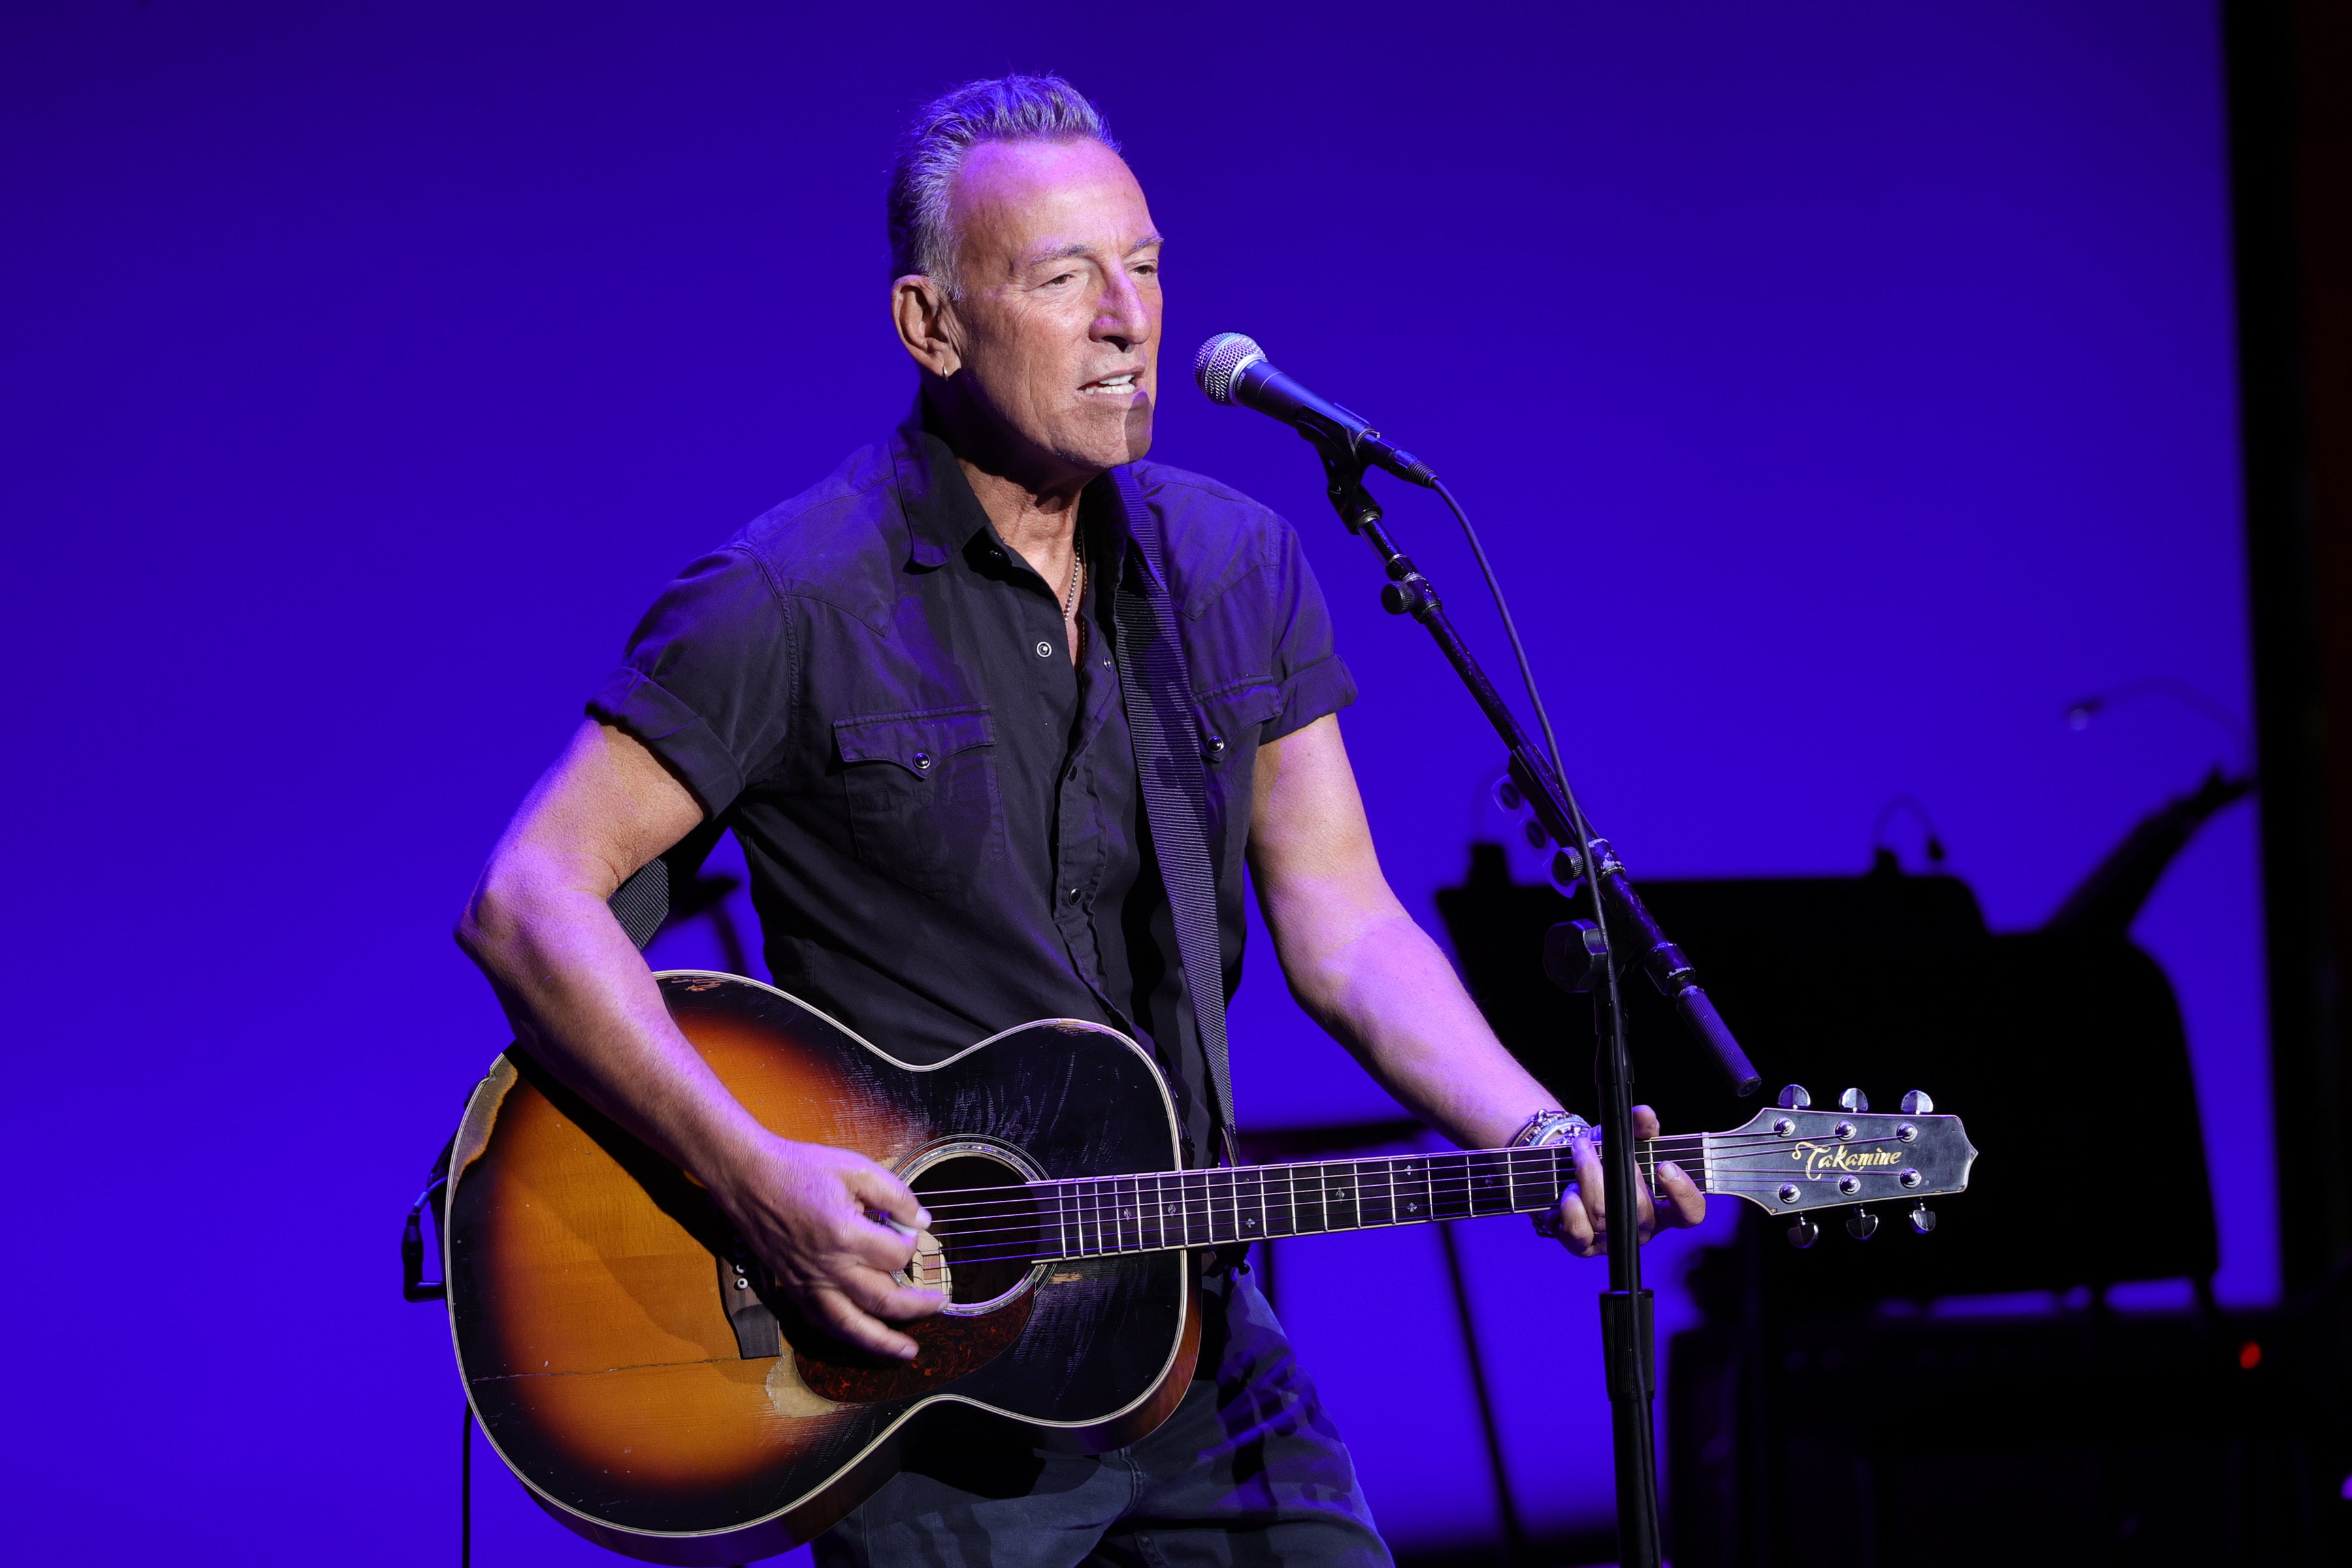 Bruce Springsteen and The E Street Band How to get tickets for the